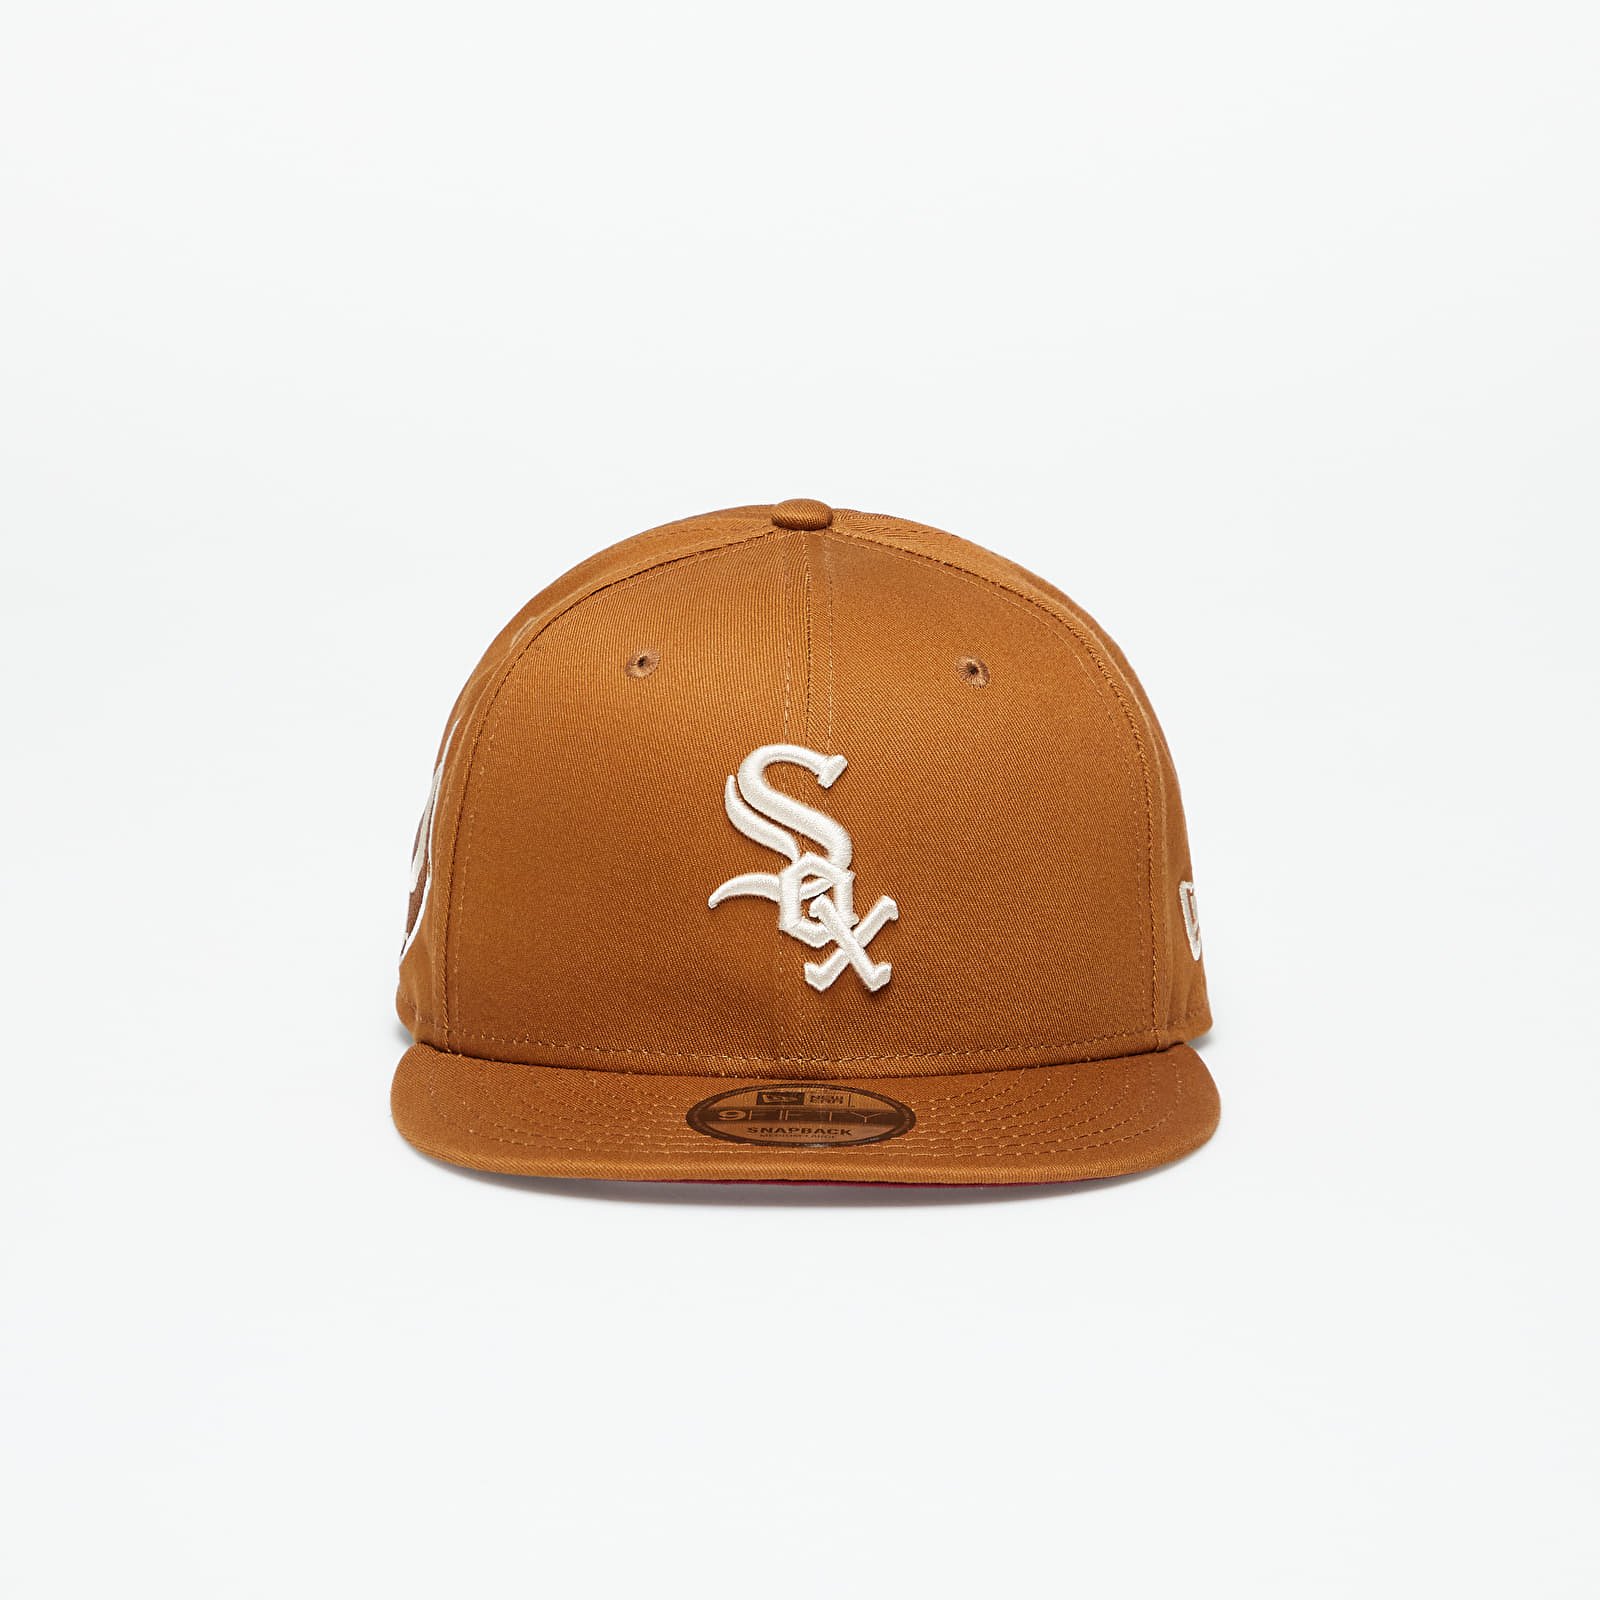 Caps New Era Chicago White Sox Side Patch 9Fifty Snapback Cap Toasted Peanut/ Stone